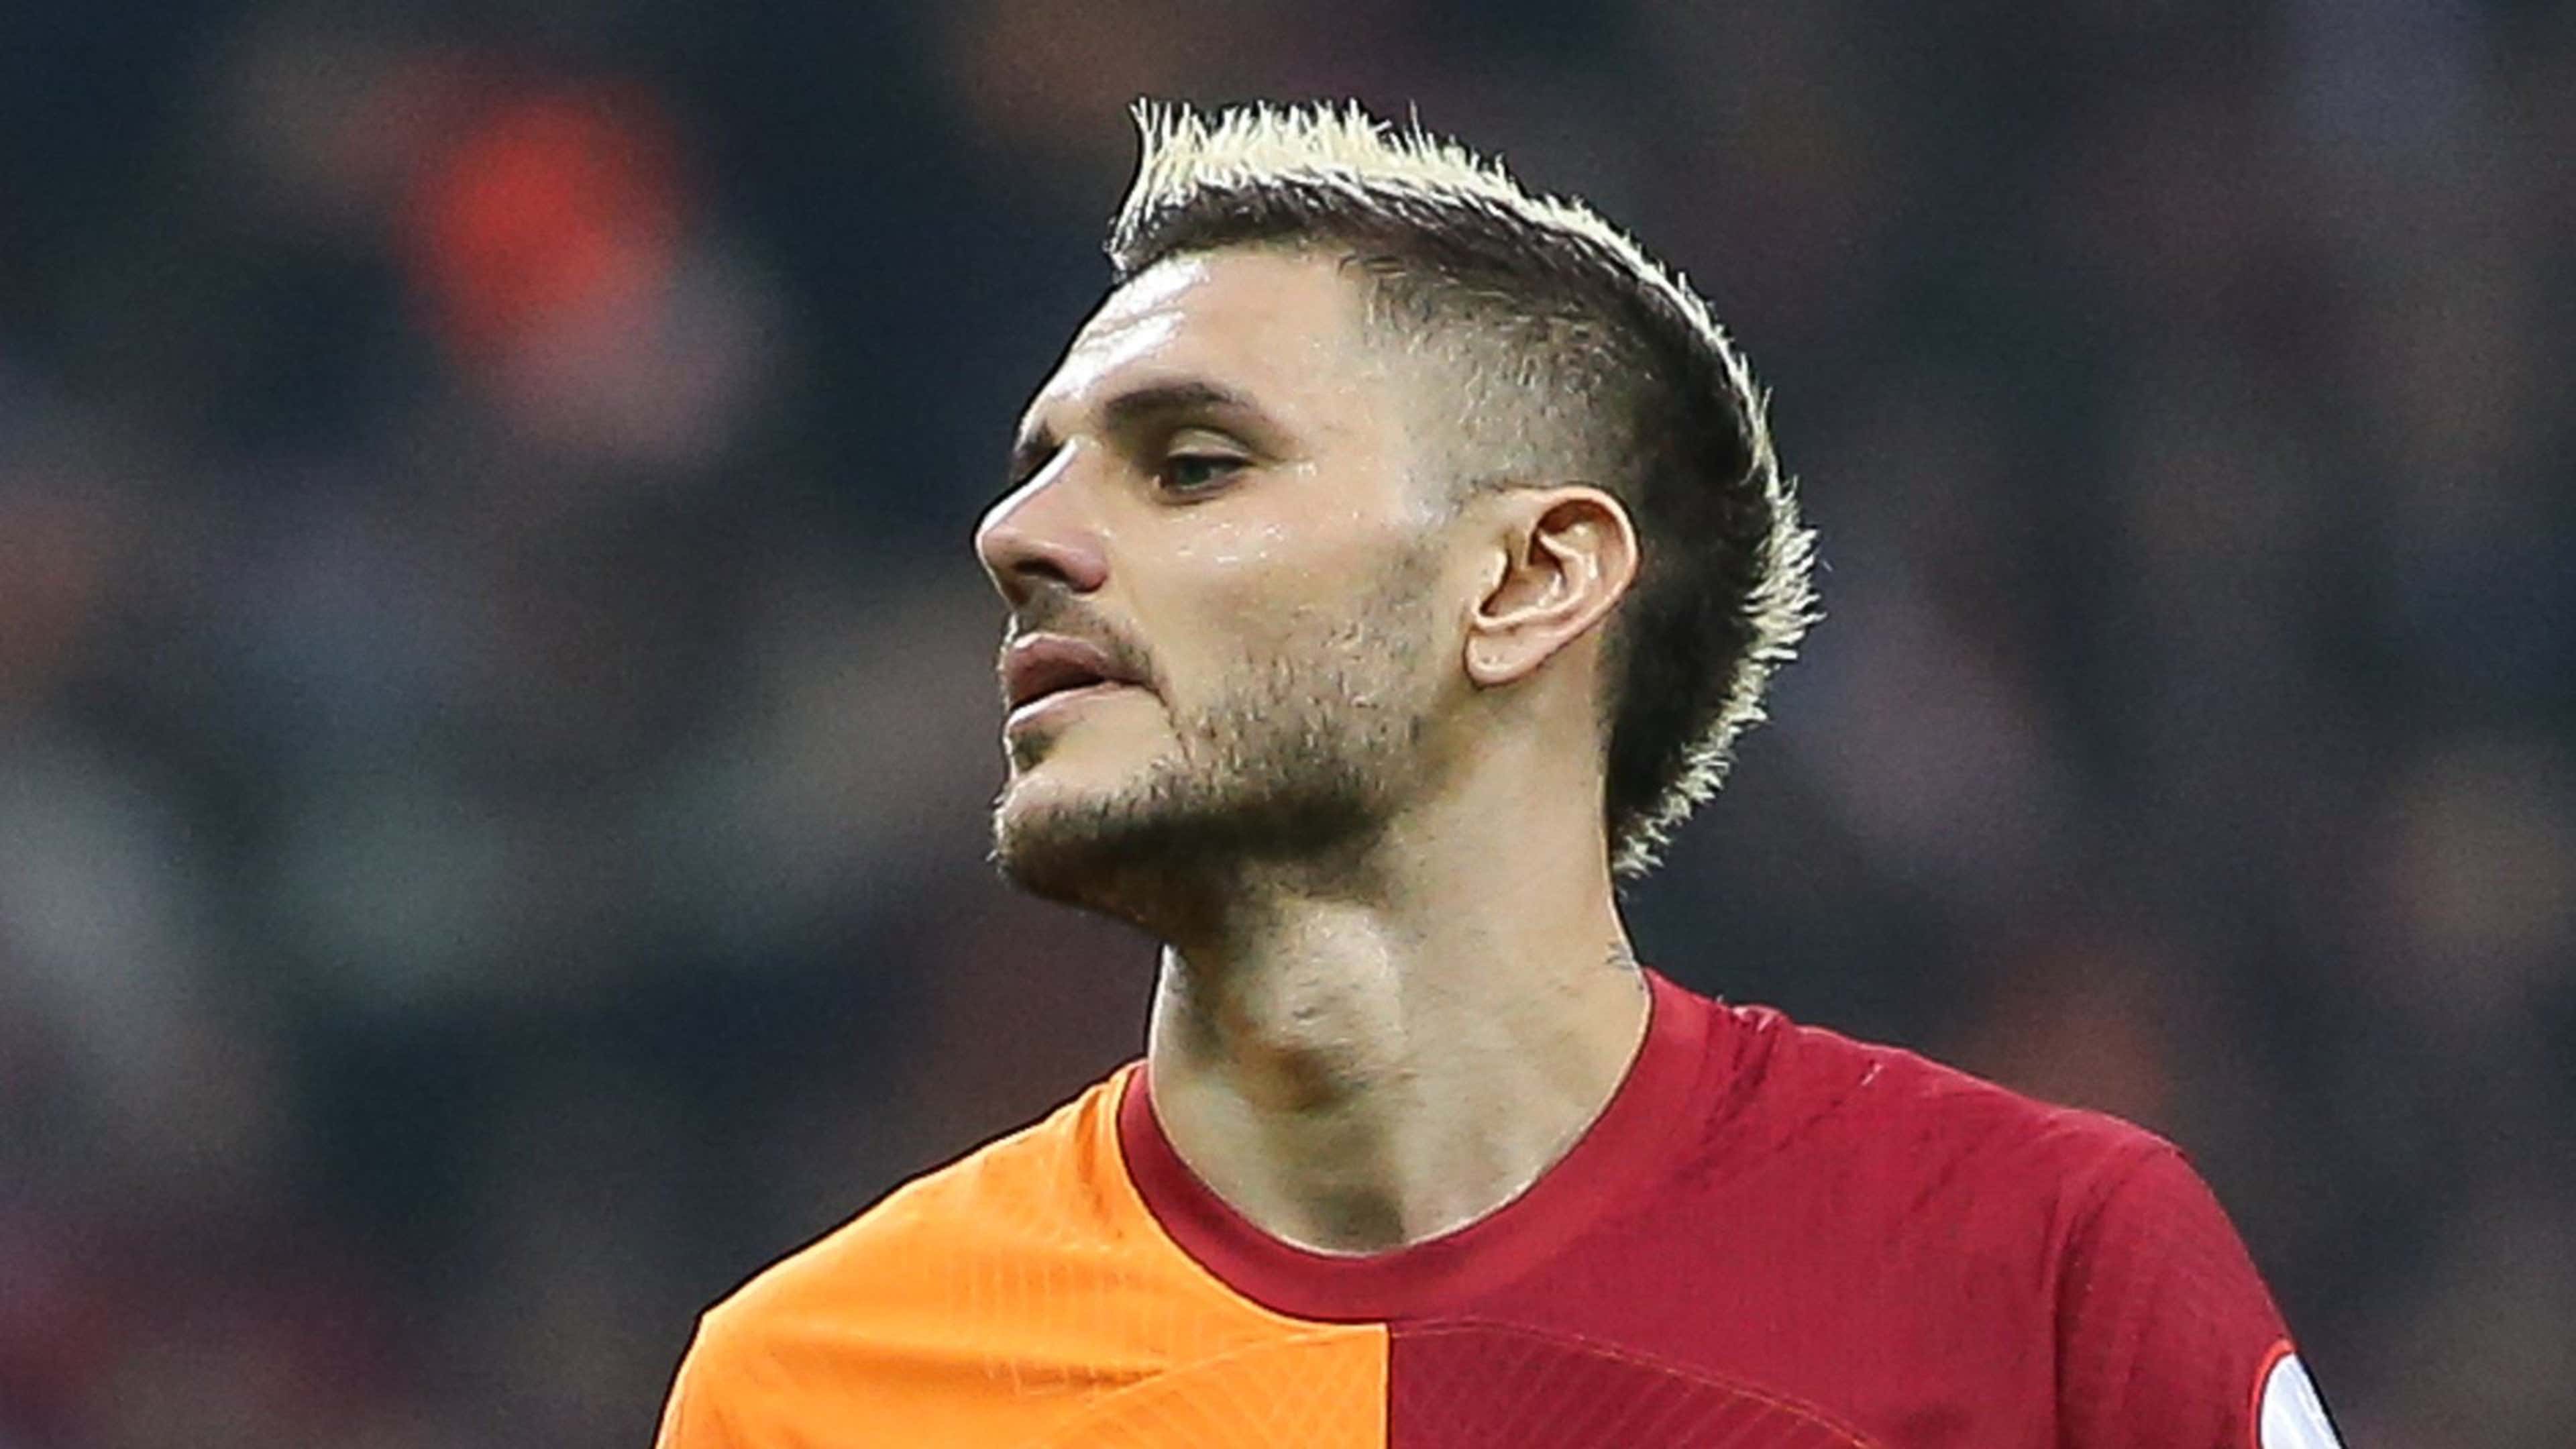 Mauro Icardi gets a black eye for Christmas! Galatasaray star shows off  bruise after collision with goalpost in draw with Fenerbahce - and Wanda  Nara has a shiner too!